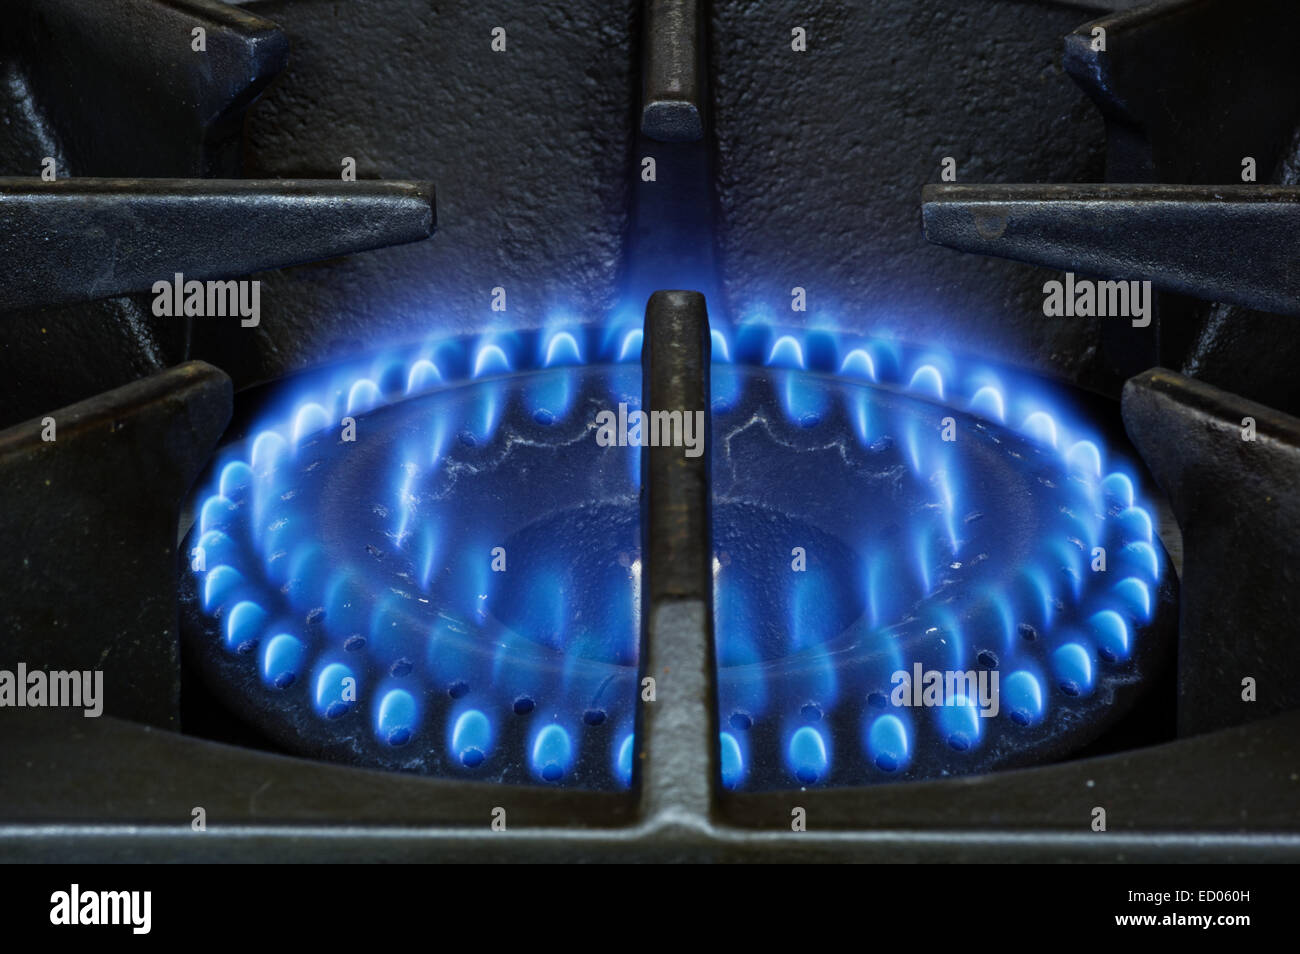 heavy duty natural gas stove burner with blue flames Stock Photo